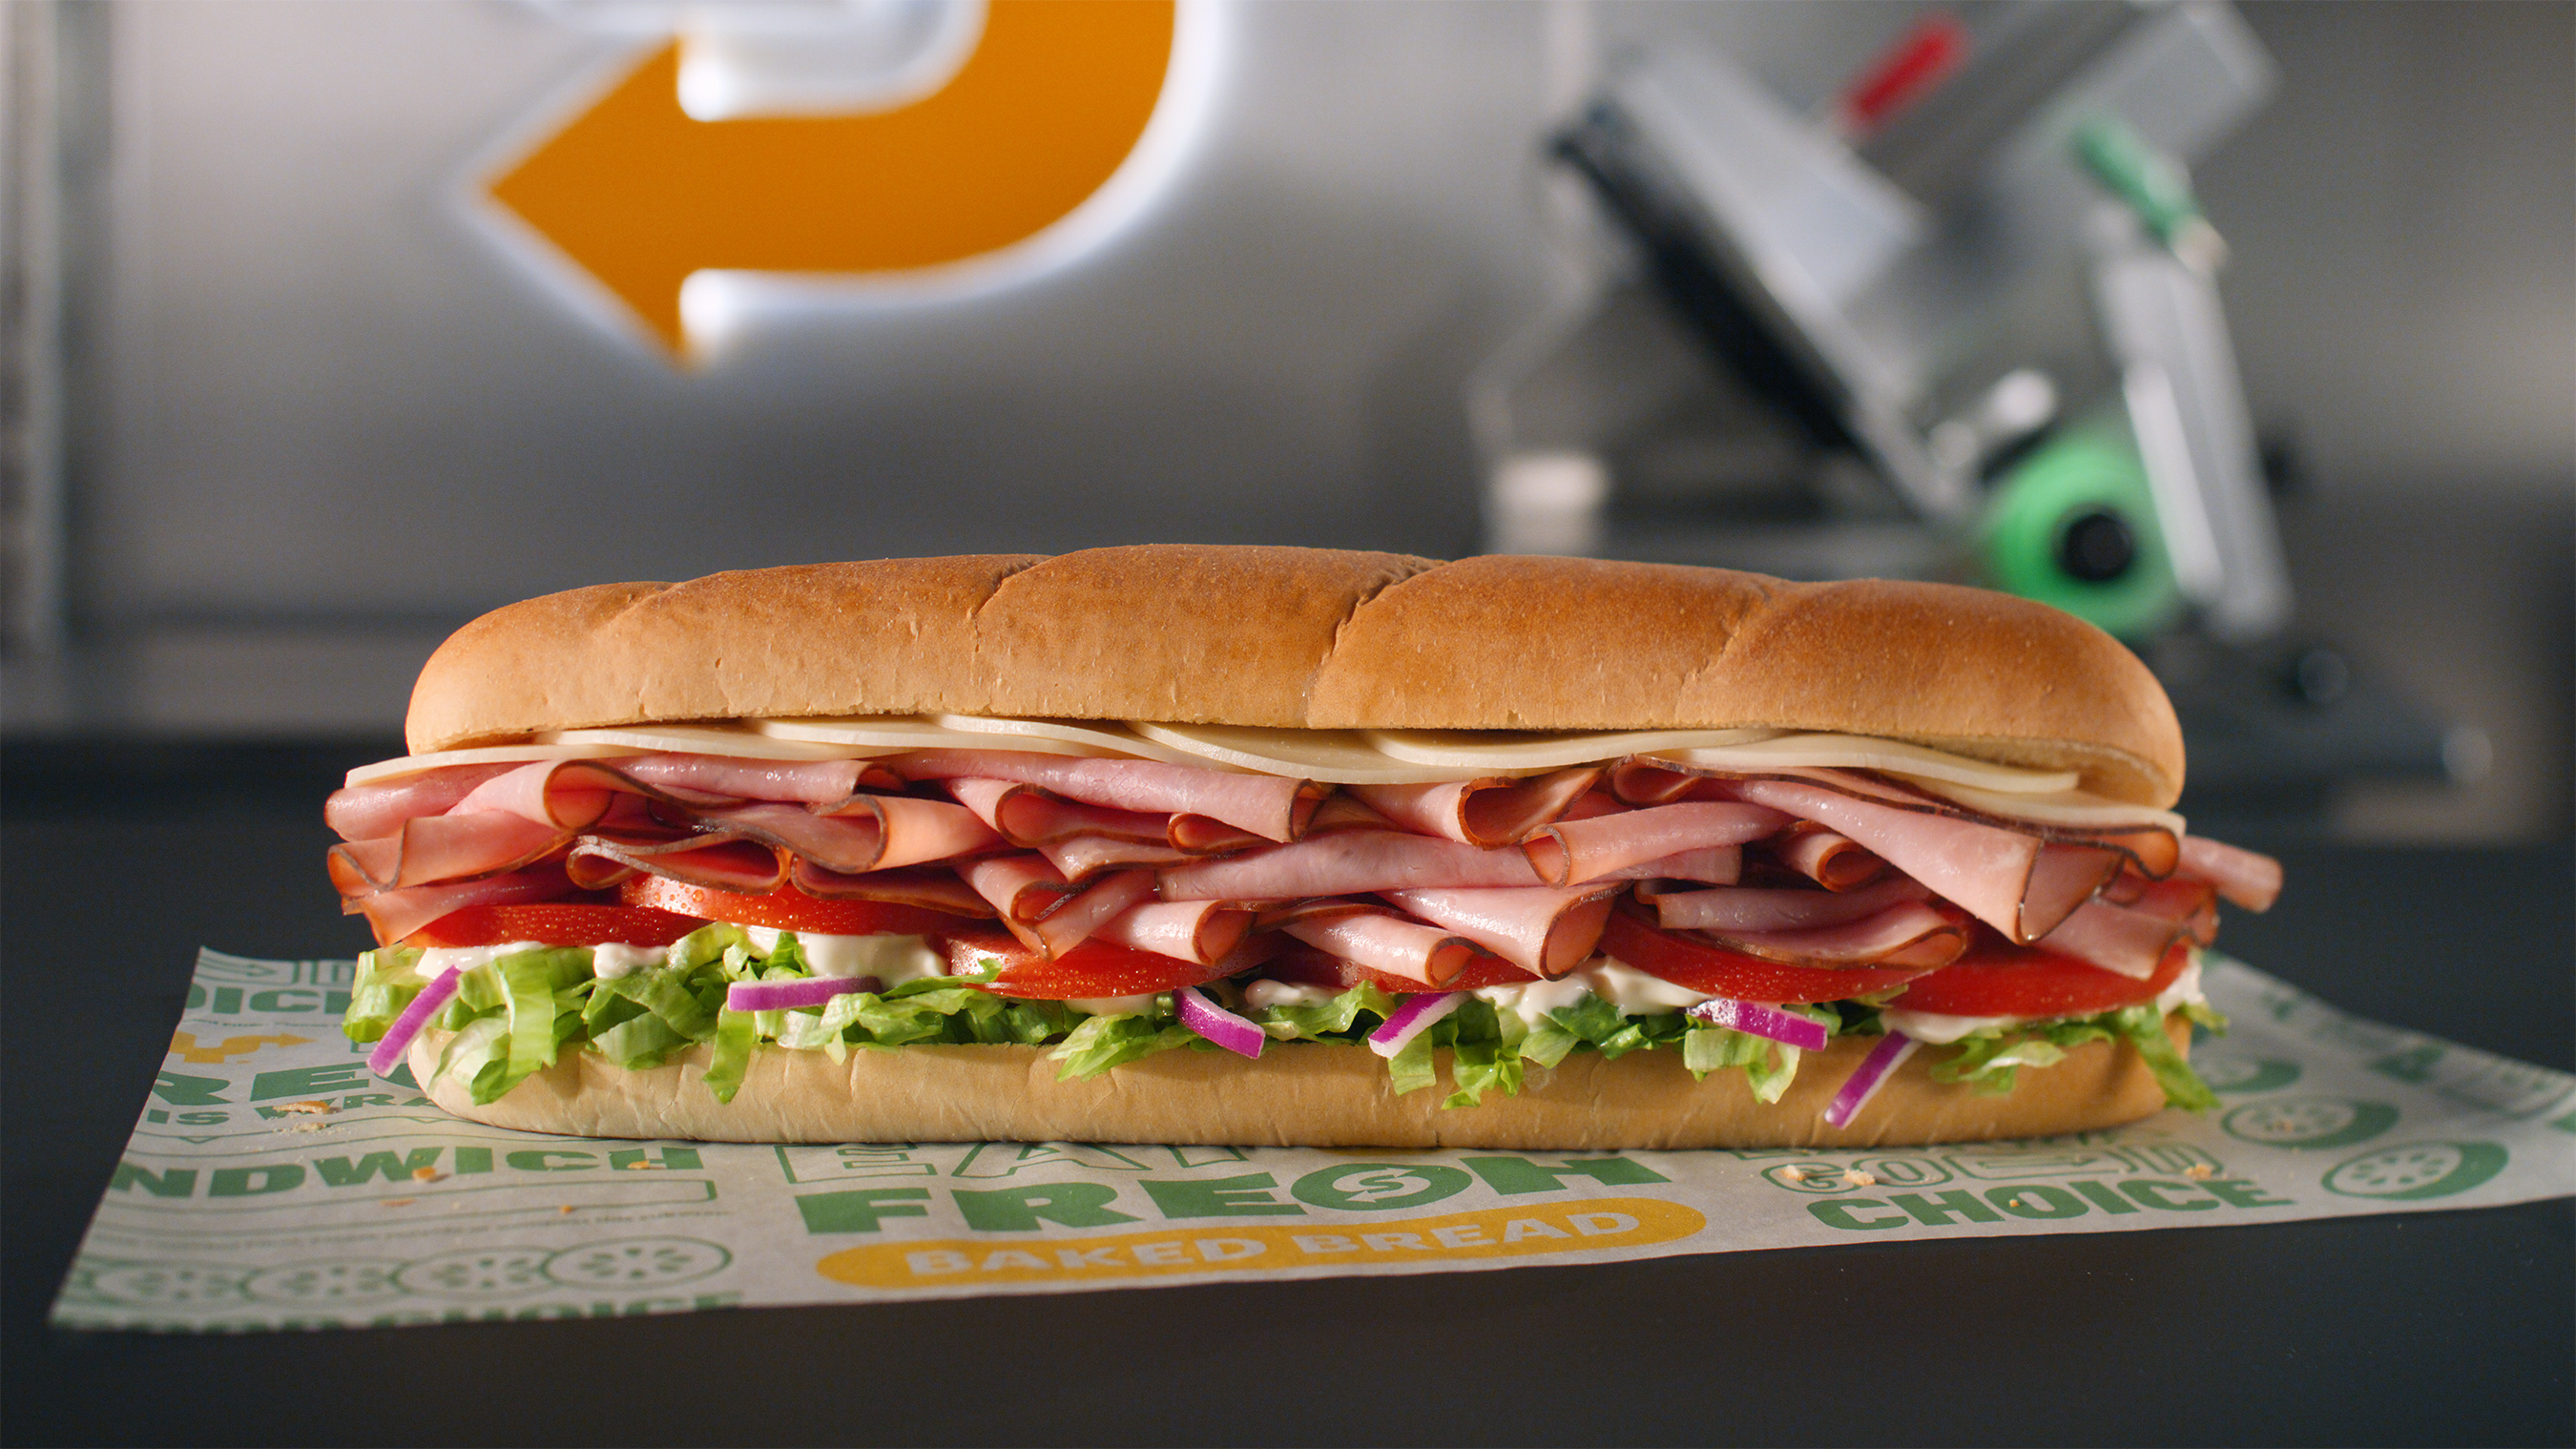 The Grand Slam Ham (#99) comes with 33% more meat than traditional subs, with freshly sliced ham and double provolone cheese, stacked with lettuce, tomato, red onions on Artisan Italian bread, drizzled with mayonnaise.